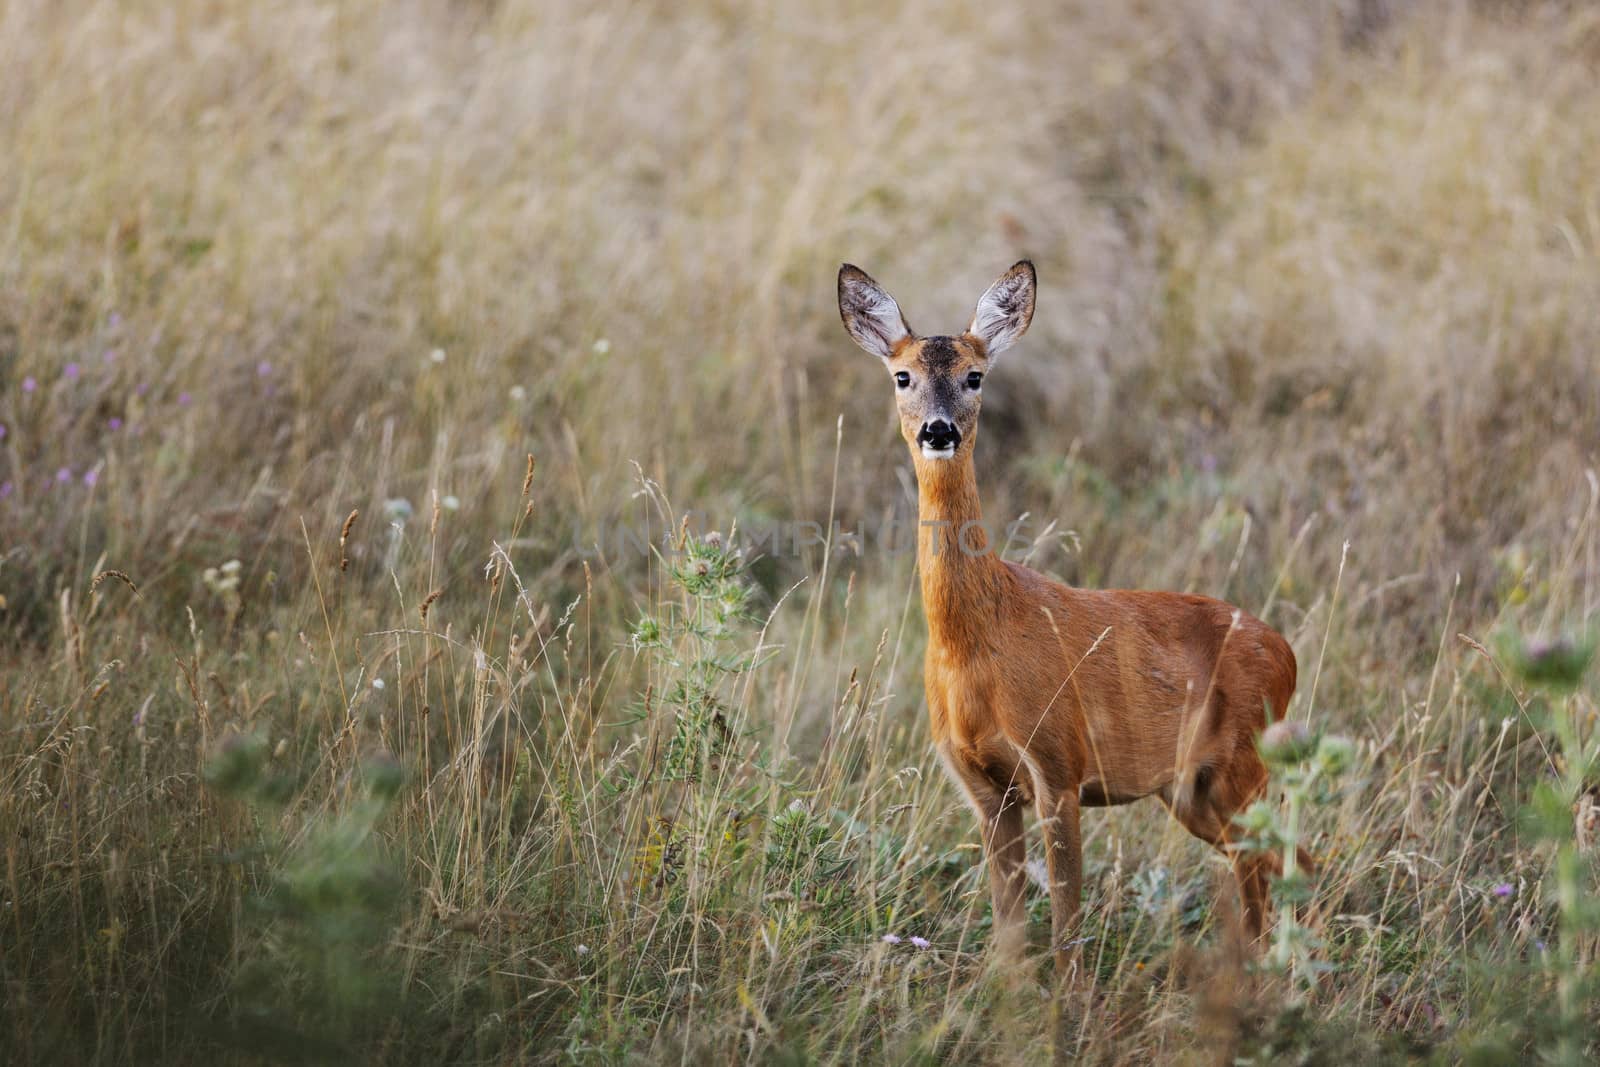 Female European roe-deer in summer grass looking at the camera with curiosity